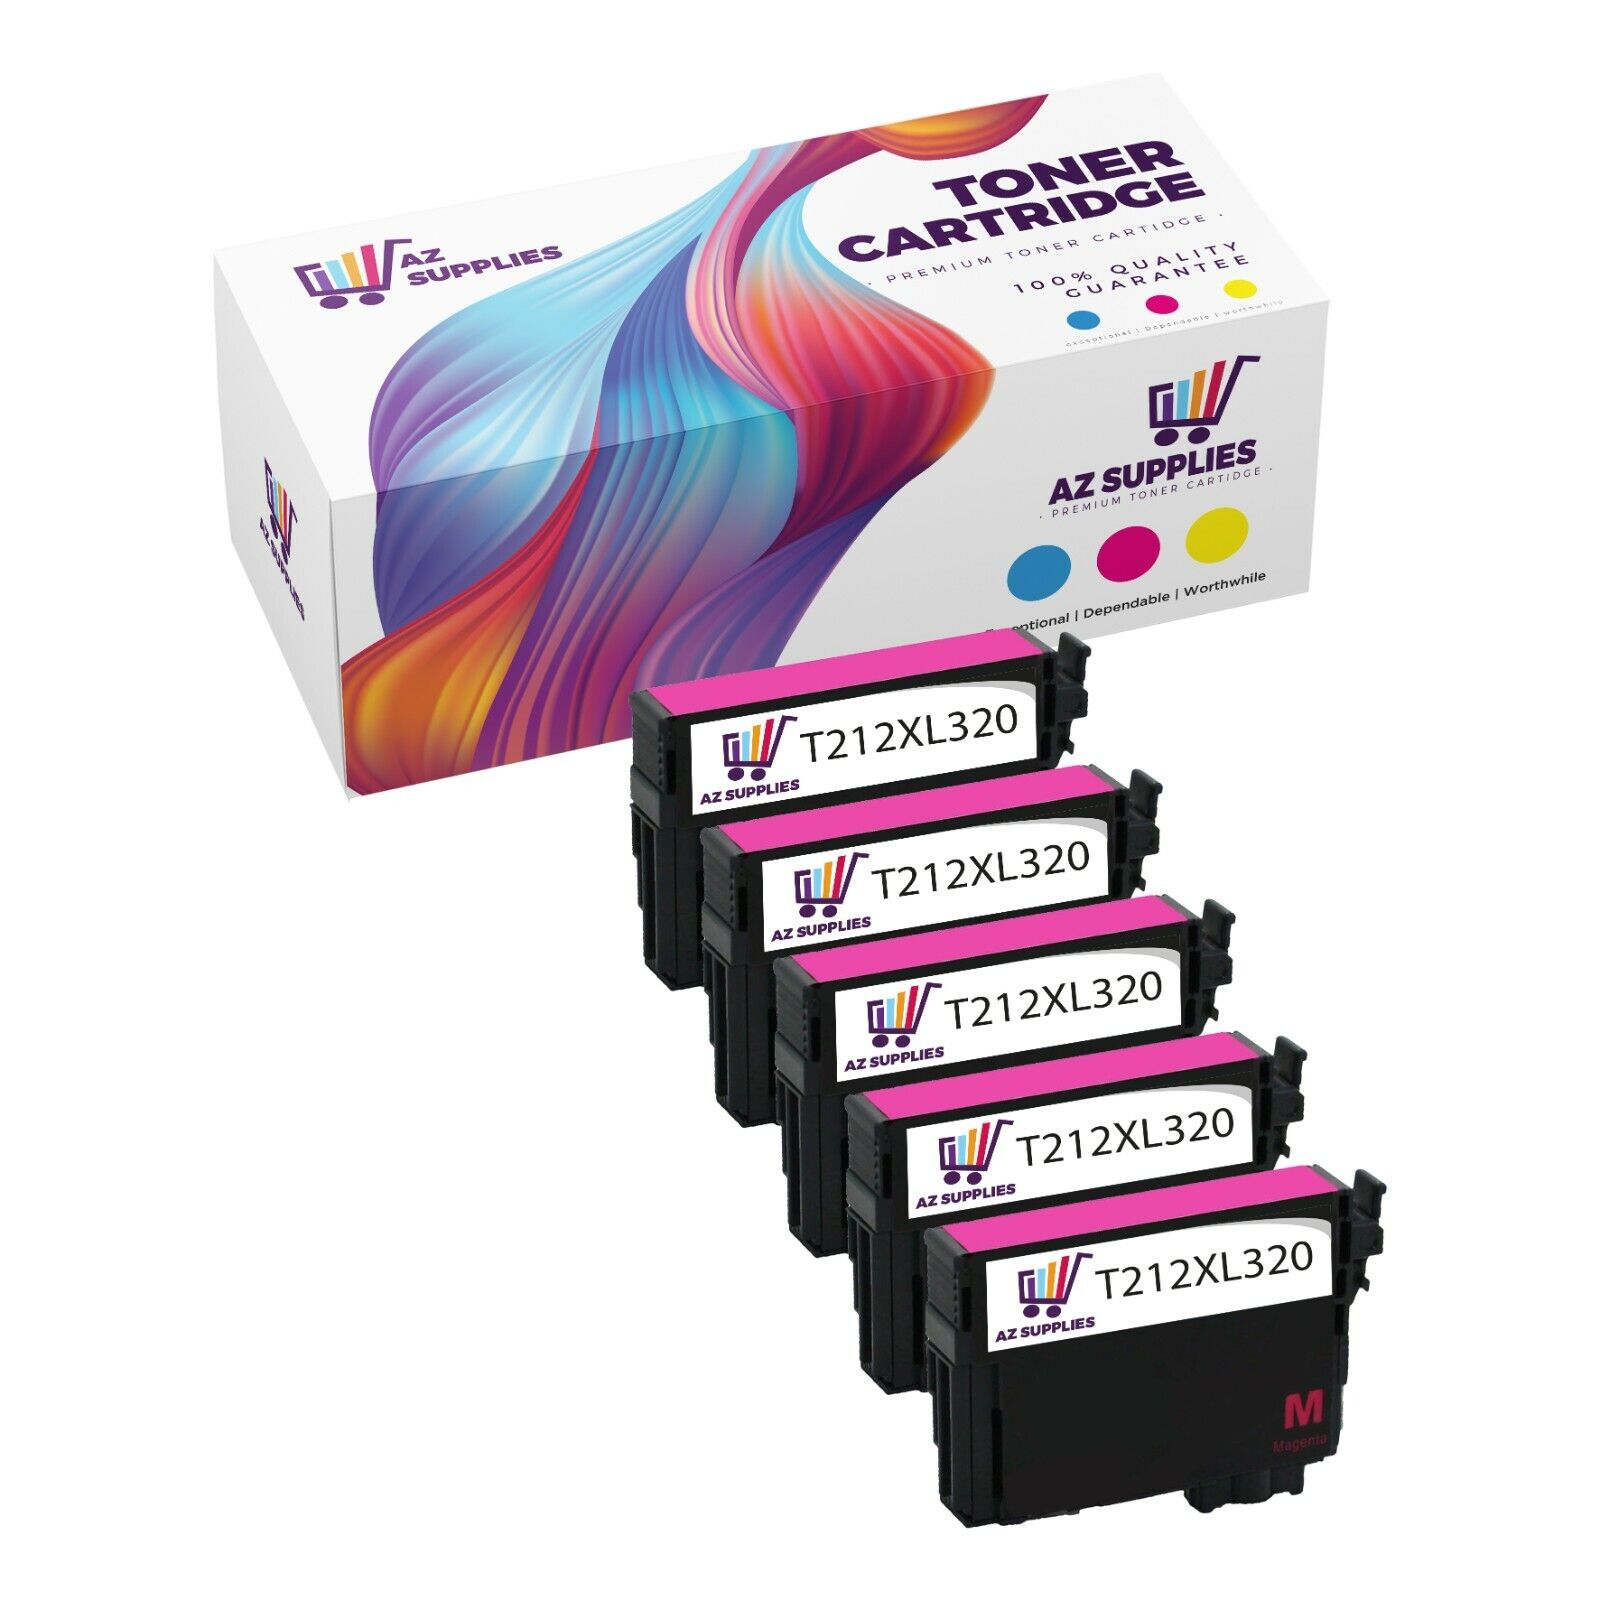 EPSON Remanufactured Ink Cartridge for T212XL320 High Yield Magenta 5 Pack